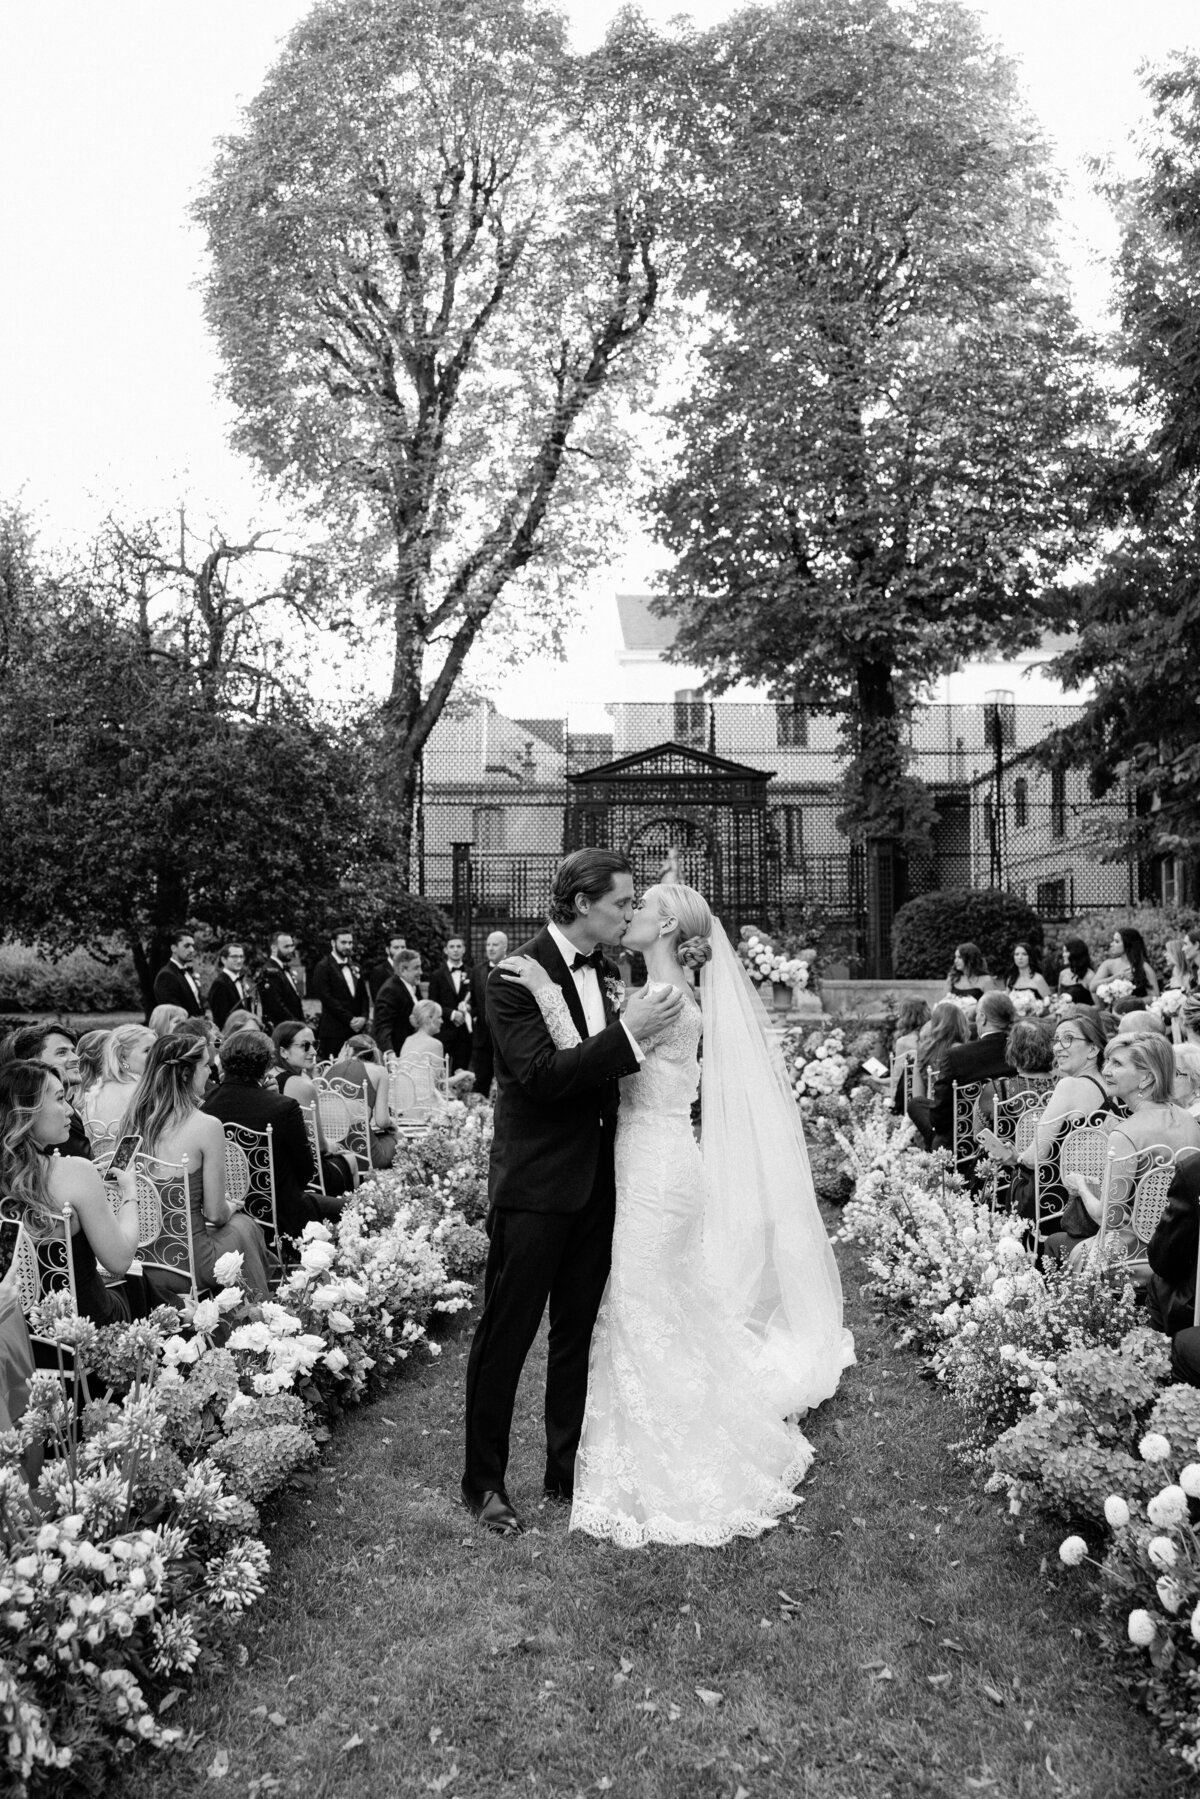 Jennifer Fox Weddings English speaking wedding planning & design agency in France crafting refined and bespoke weddings and celebrations Provence, Paris and destination wd594